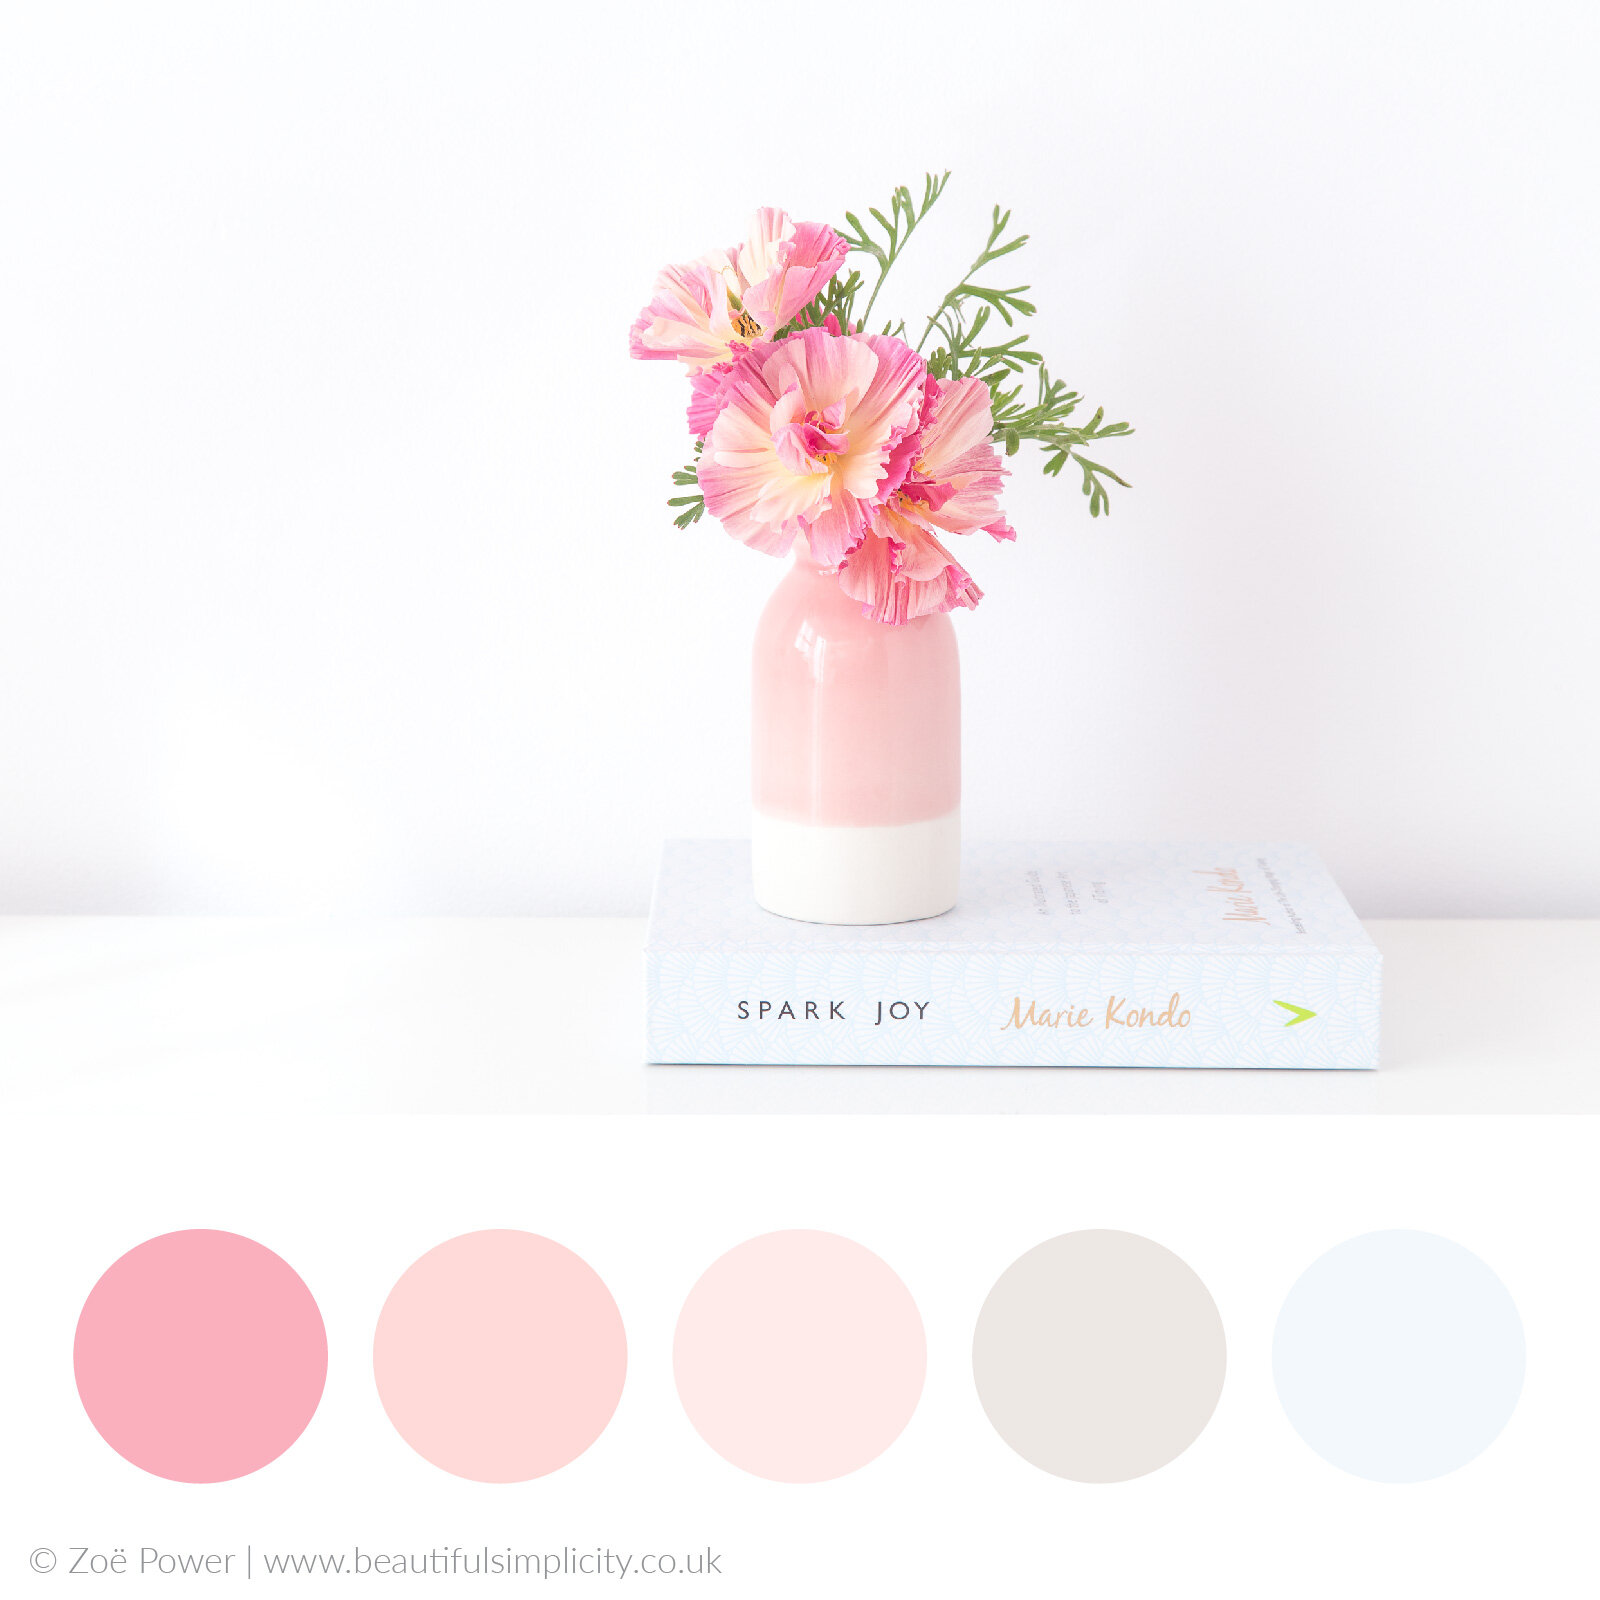 Pink Winter Sky Inspired Colour Palette, Grey and Pink Color